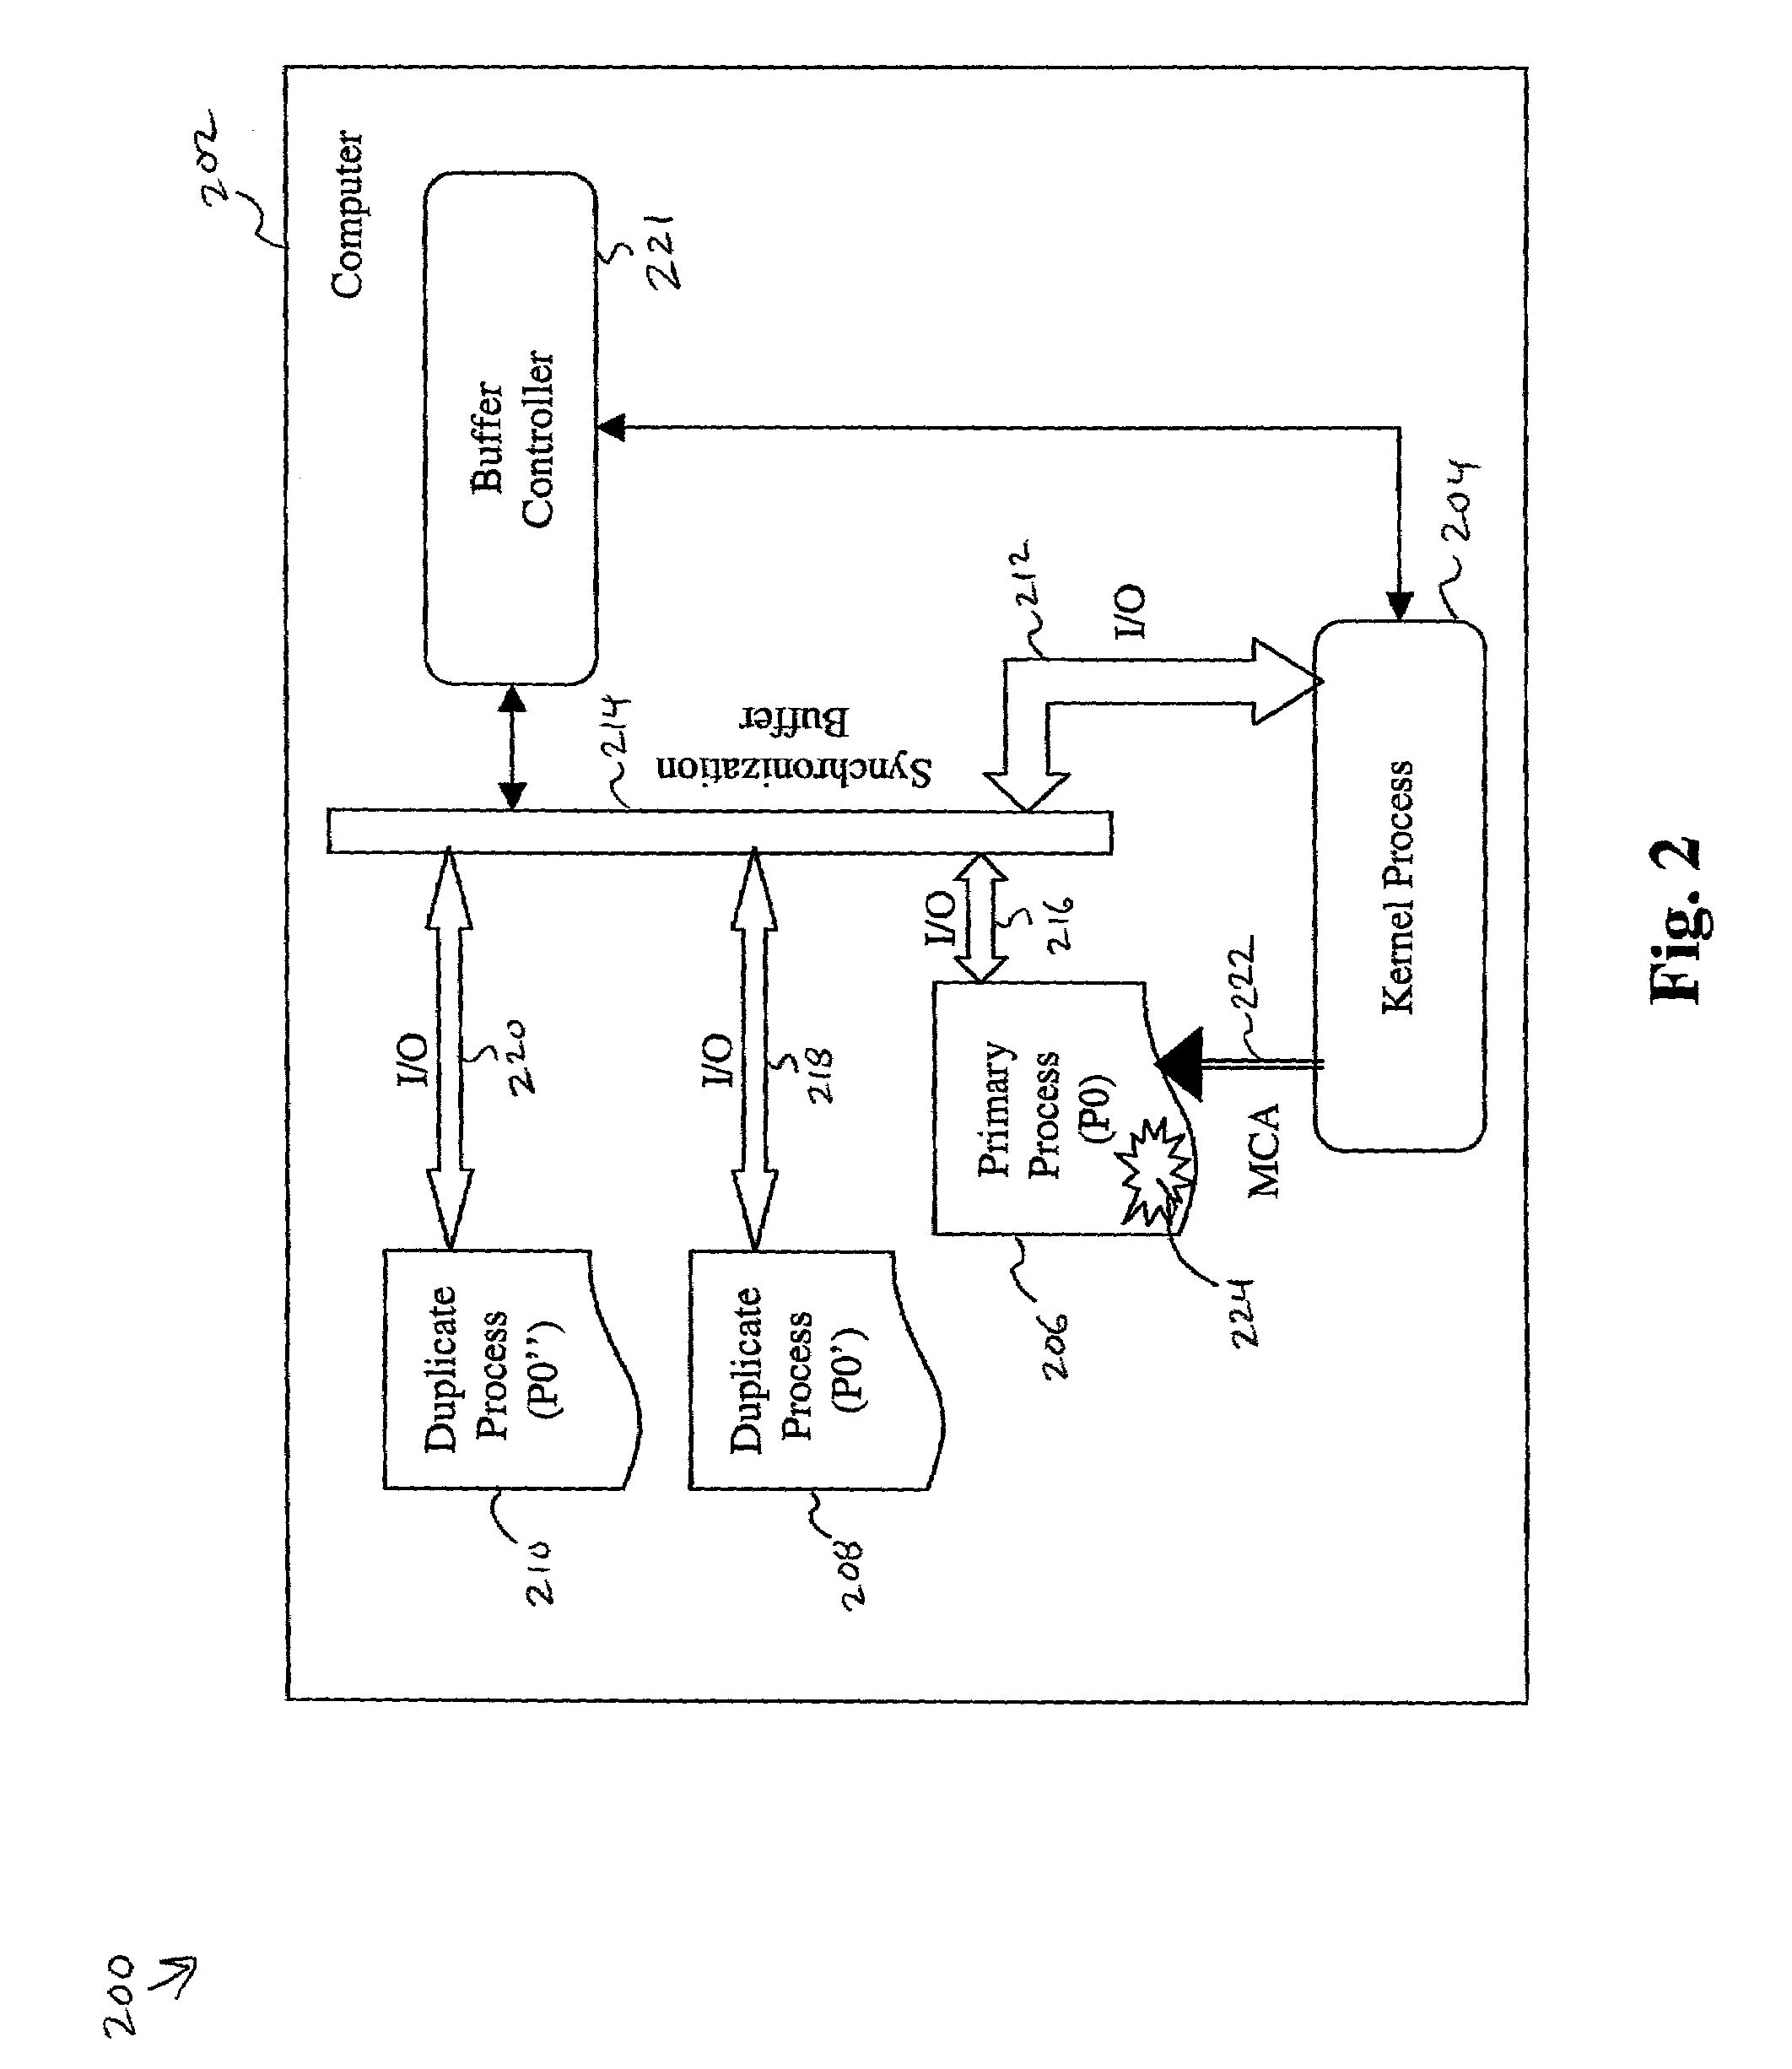 System and method for memory failure recovery using lockstep processes